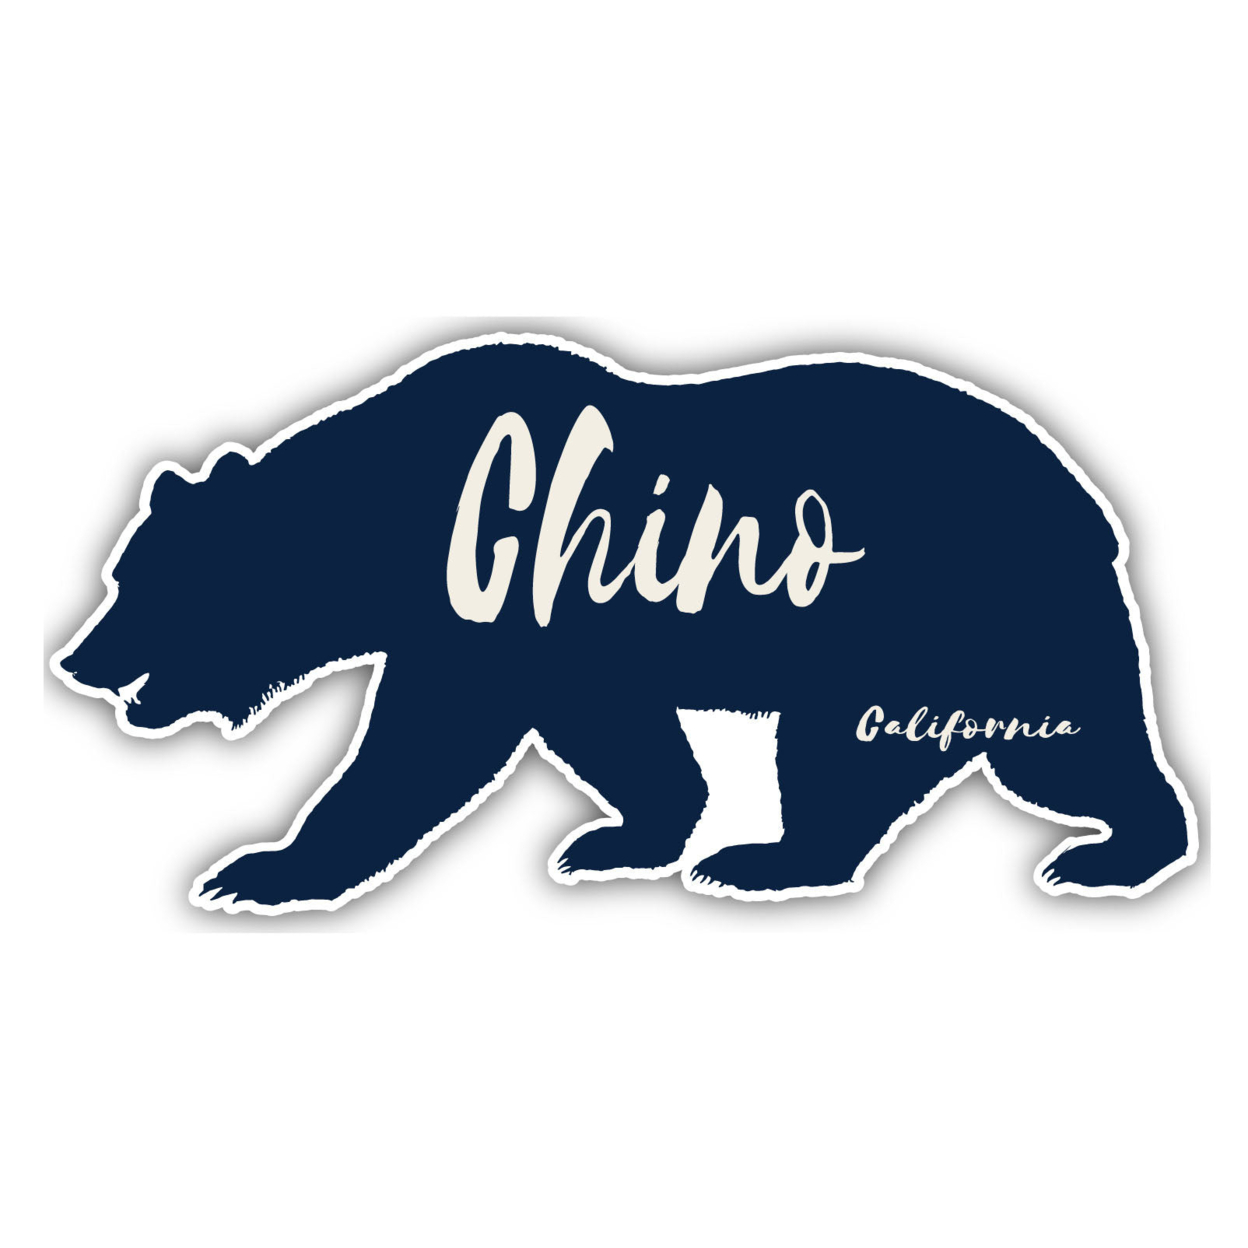 Chino California Souvenir Decorative Stickers (Choose Theme And Size) - 4-Pack, 4-Inch, Bear